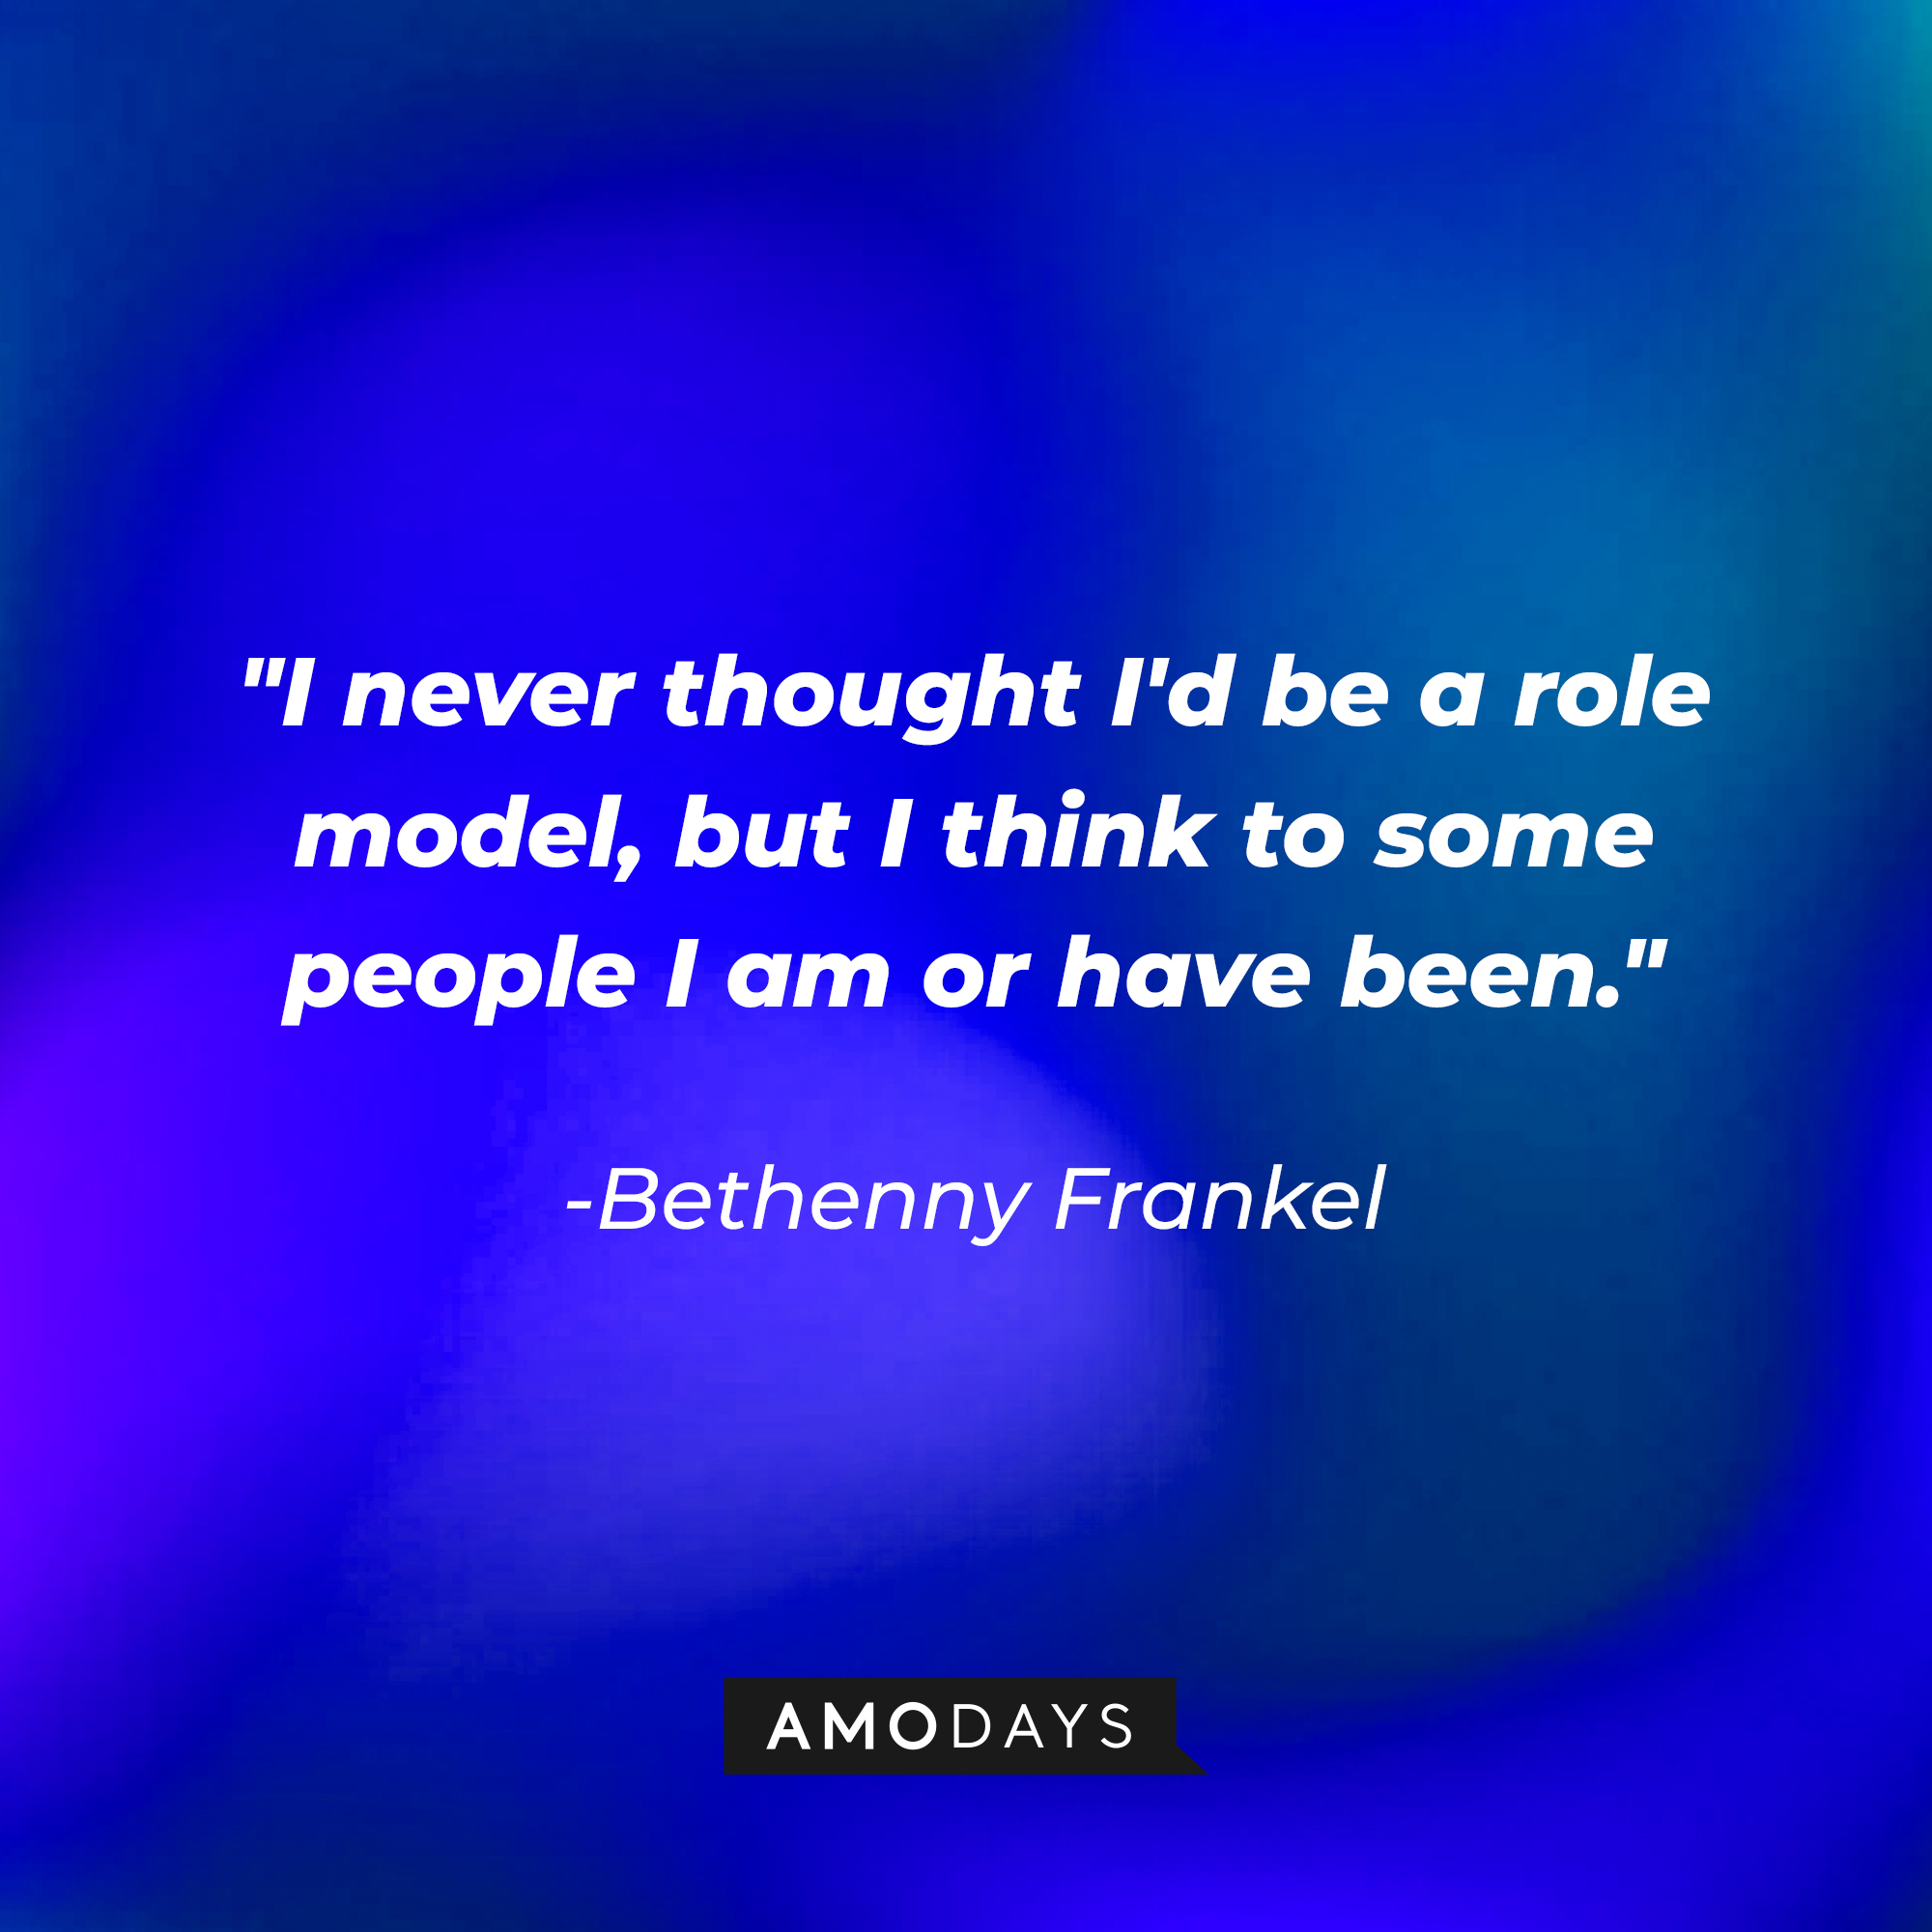 Bethenny Frankel's quote: "I never thought I'd be a role model, but I think to some people I am or have been." | Source: Amodays